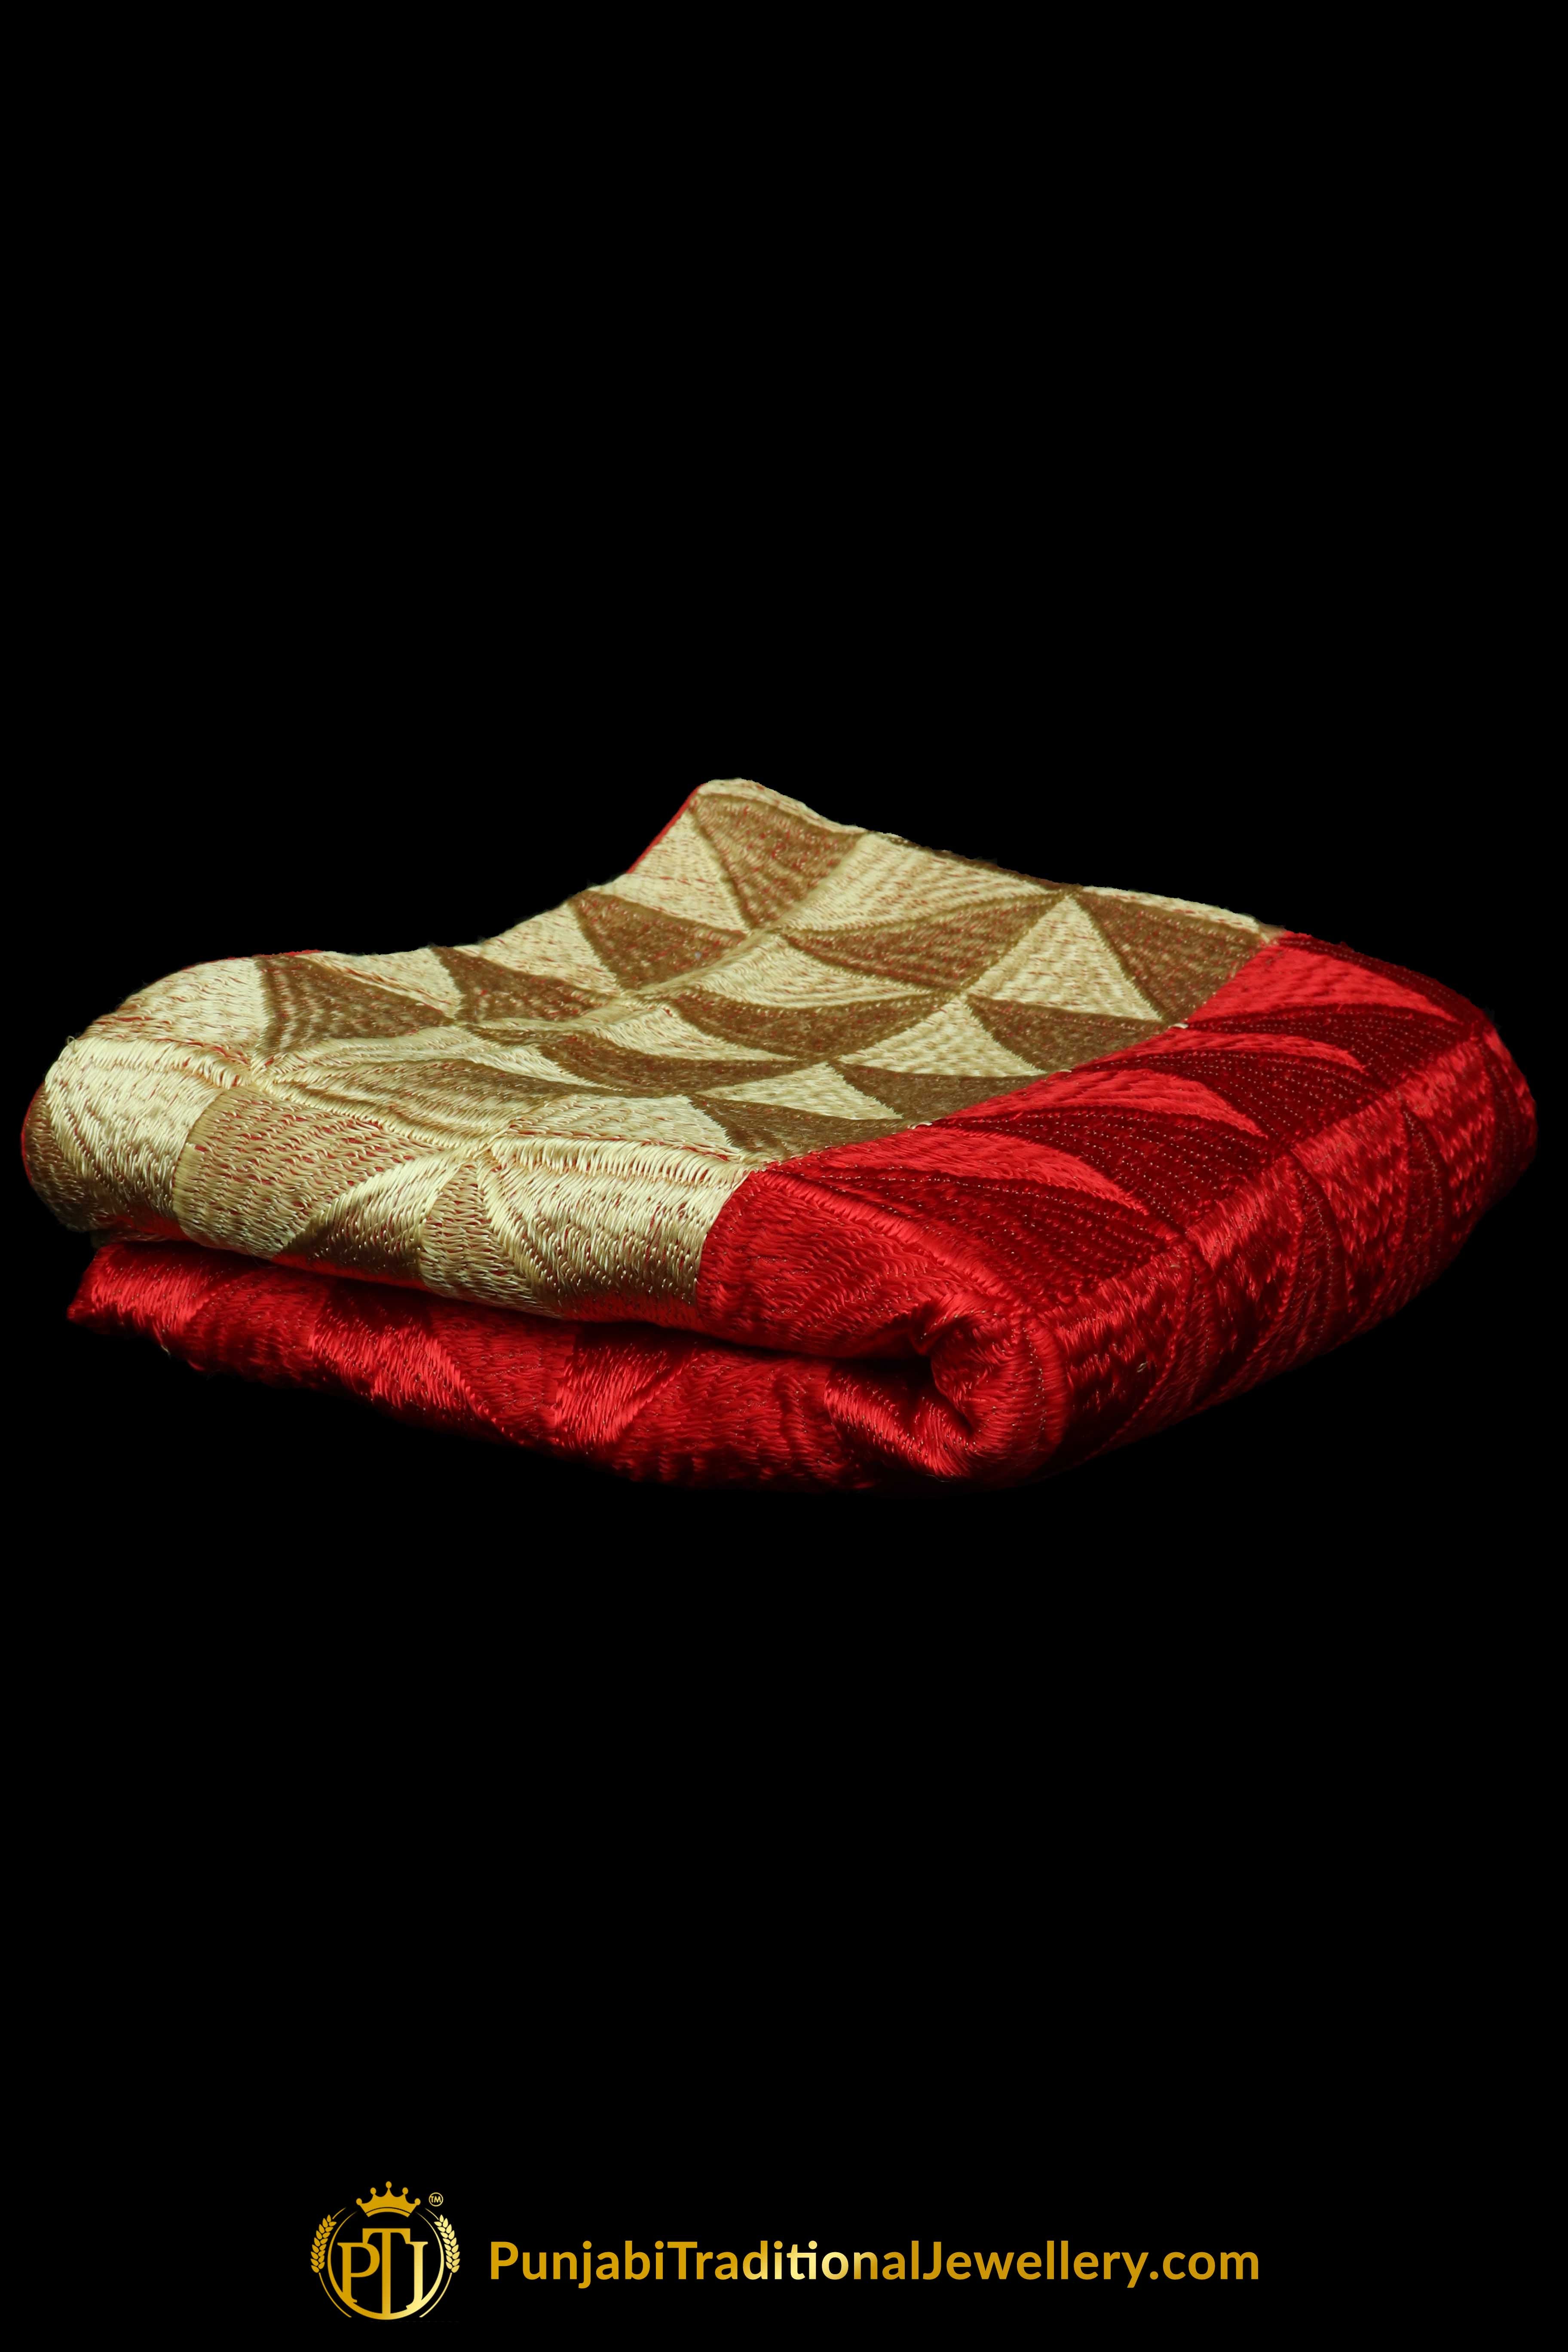 Pure Phulkari Dupatta With Golden & Red Color By Punjabi Traditional Jewellery